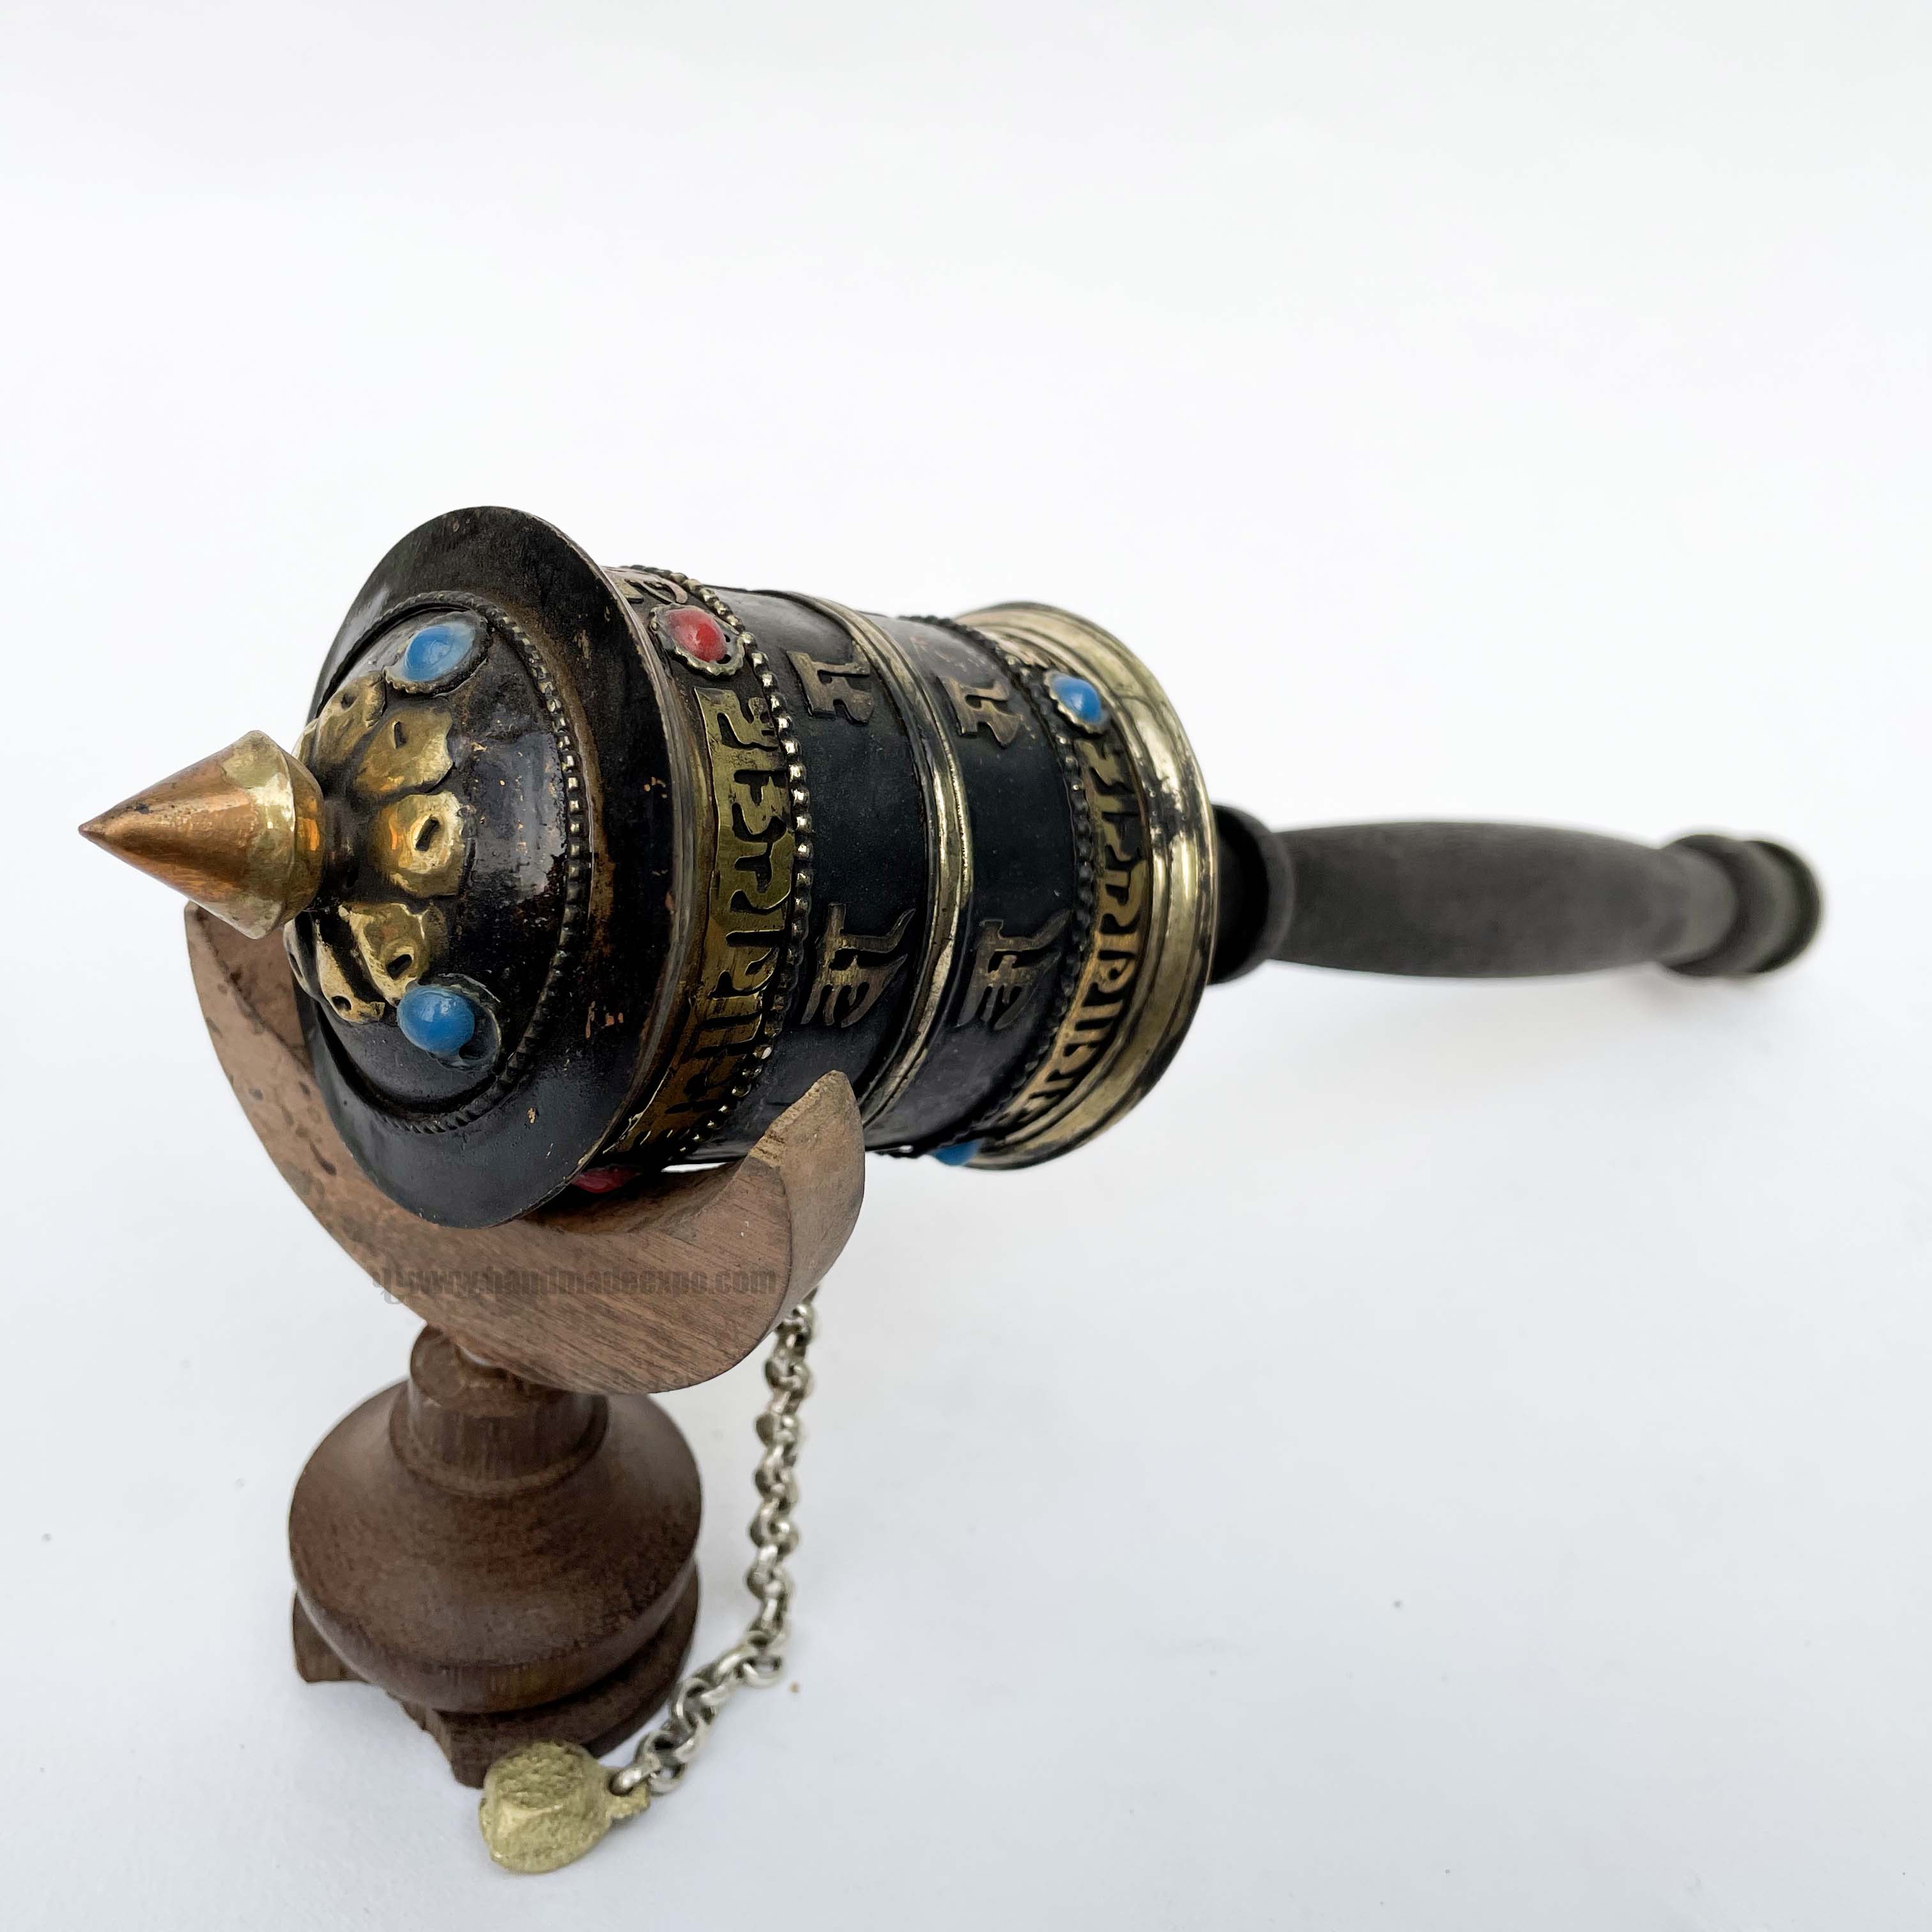 Brass Hand Held With Mantra Prayer Wheel, stone Setting, Black Color